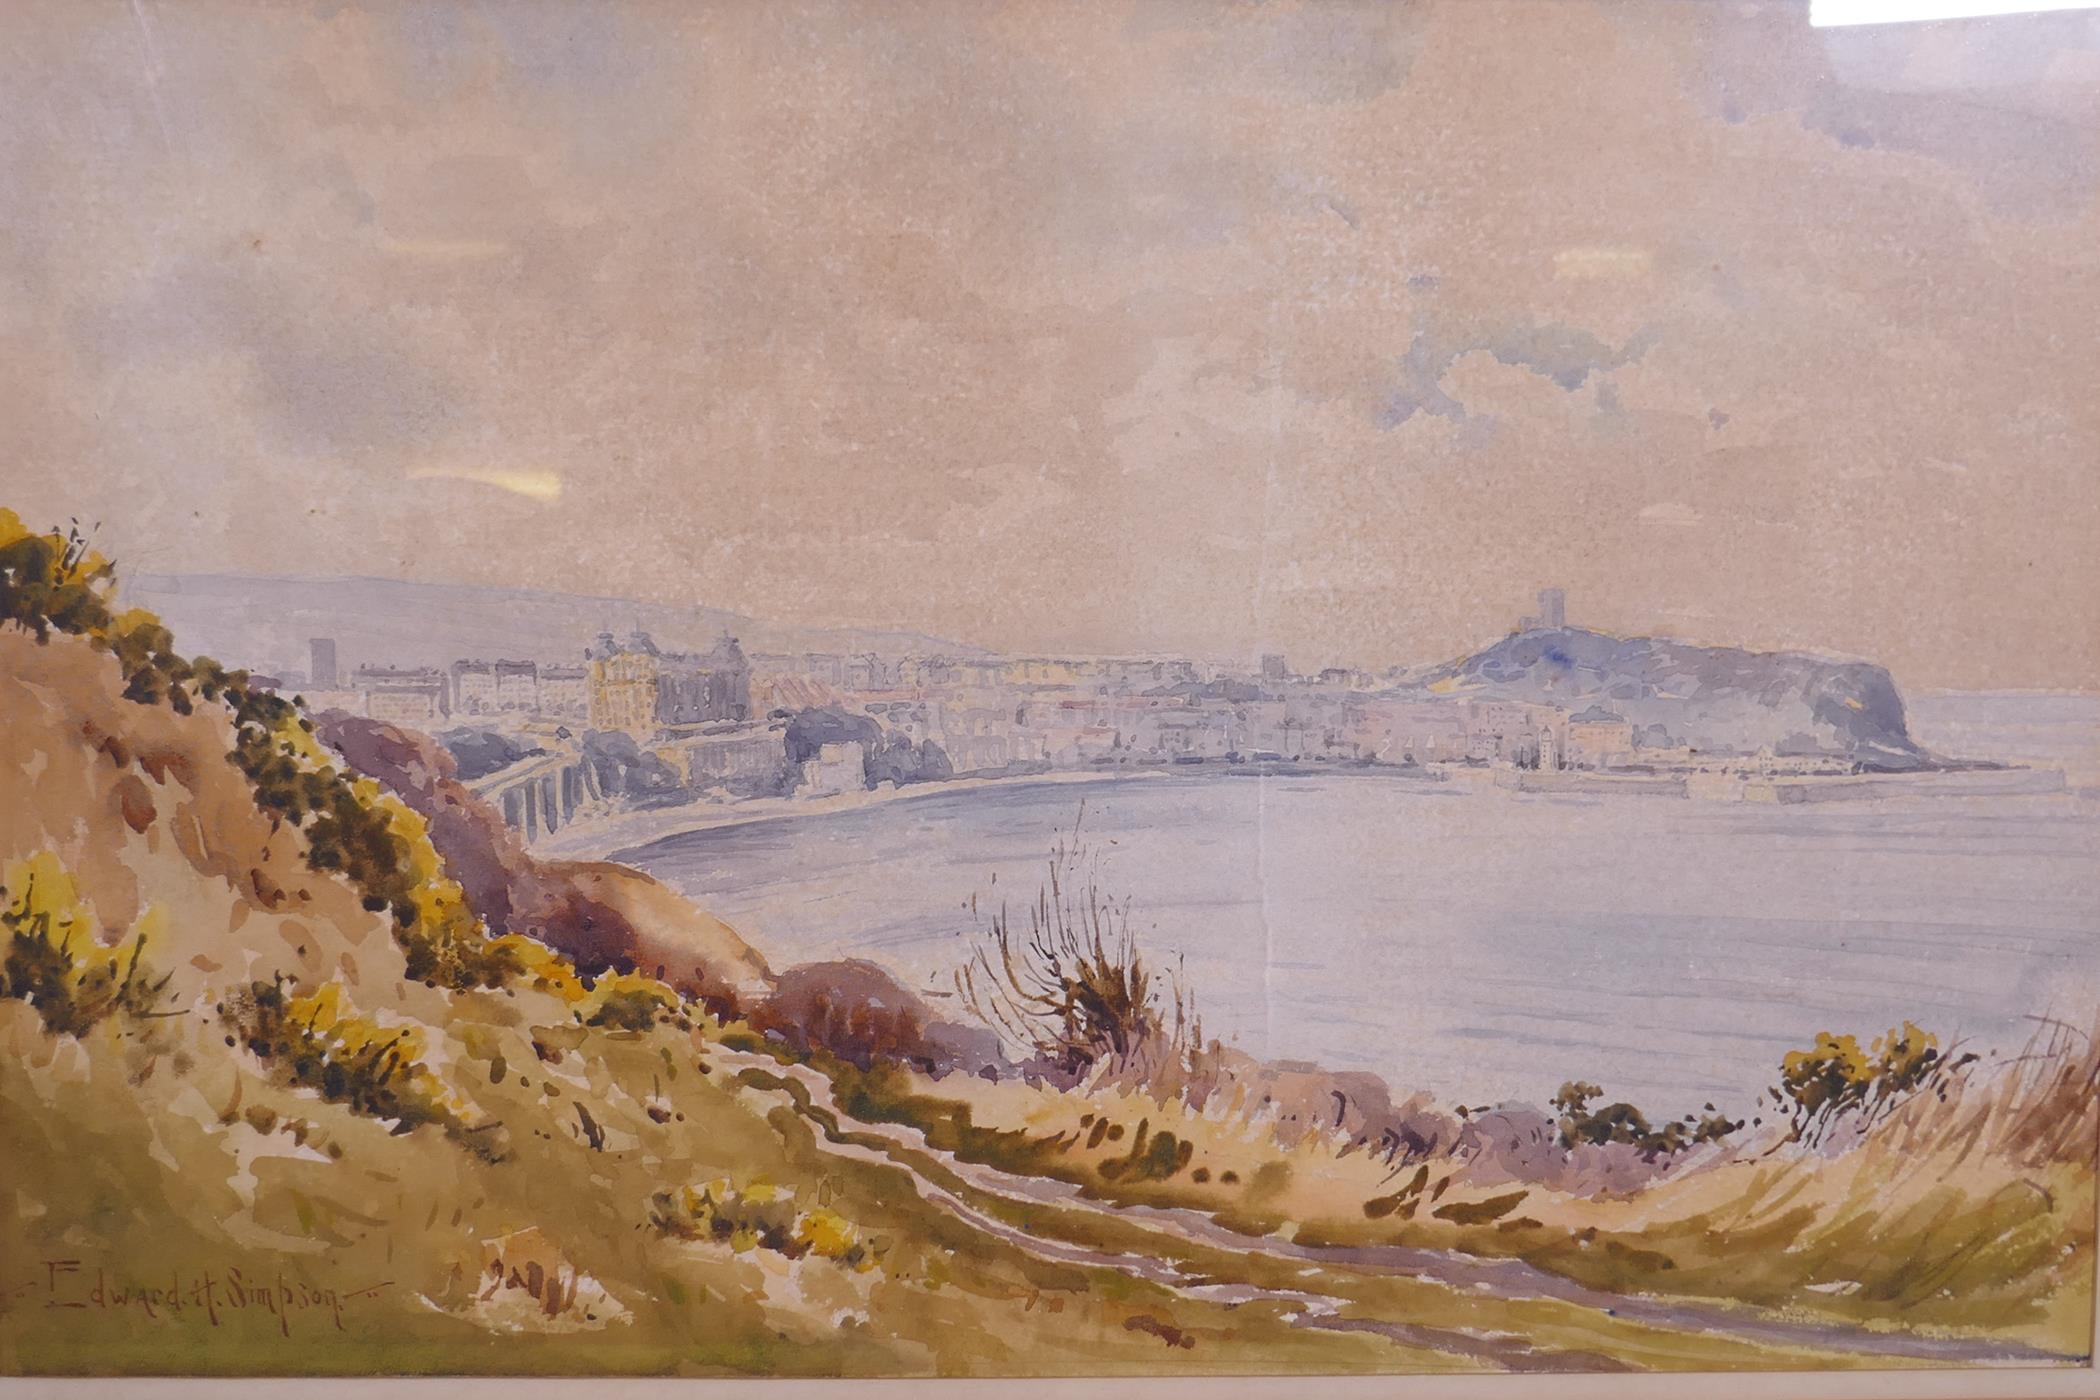 Edward H. Simpson, South Bay from Cliff Tops, signed, watercolour, 43 x 28cm